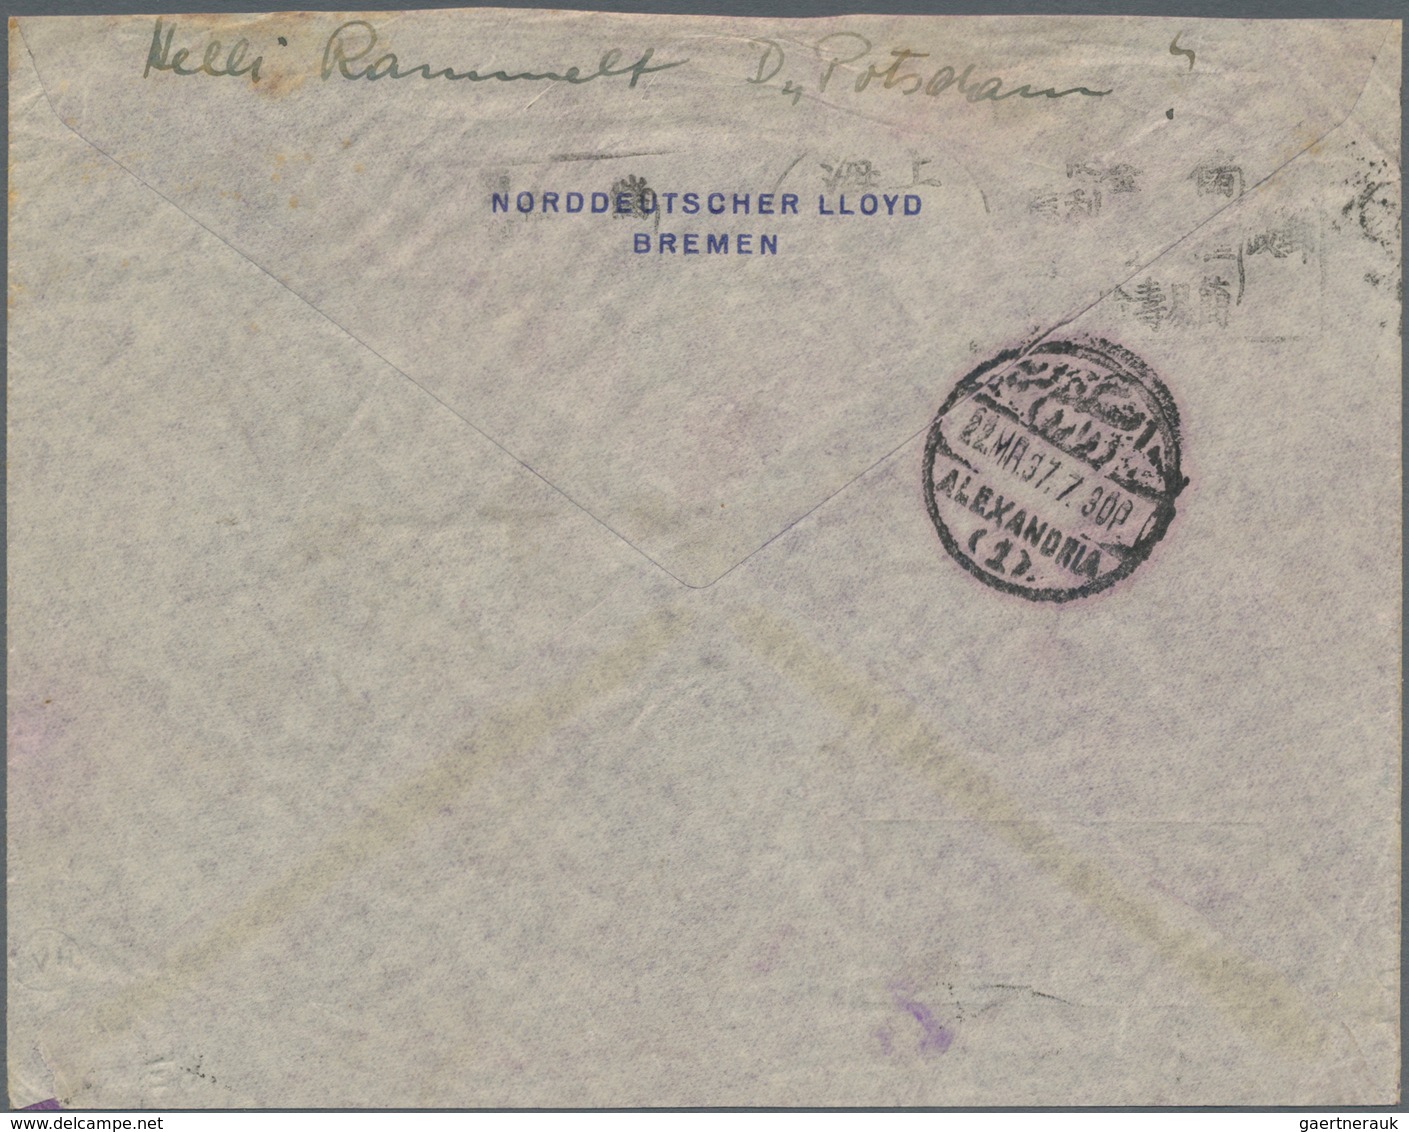 China - Portomarken: 1932, Top Values 20 C., 30 C. Tied "SHANGHAI 15.4.37" To Inbound Airmail Cover - Postage Due